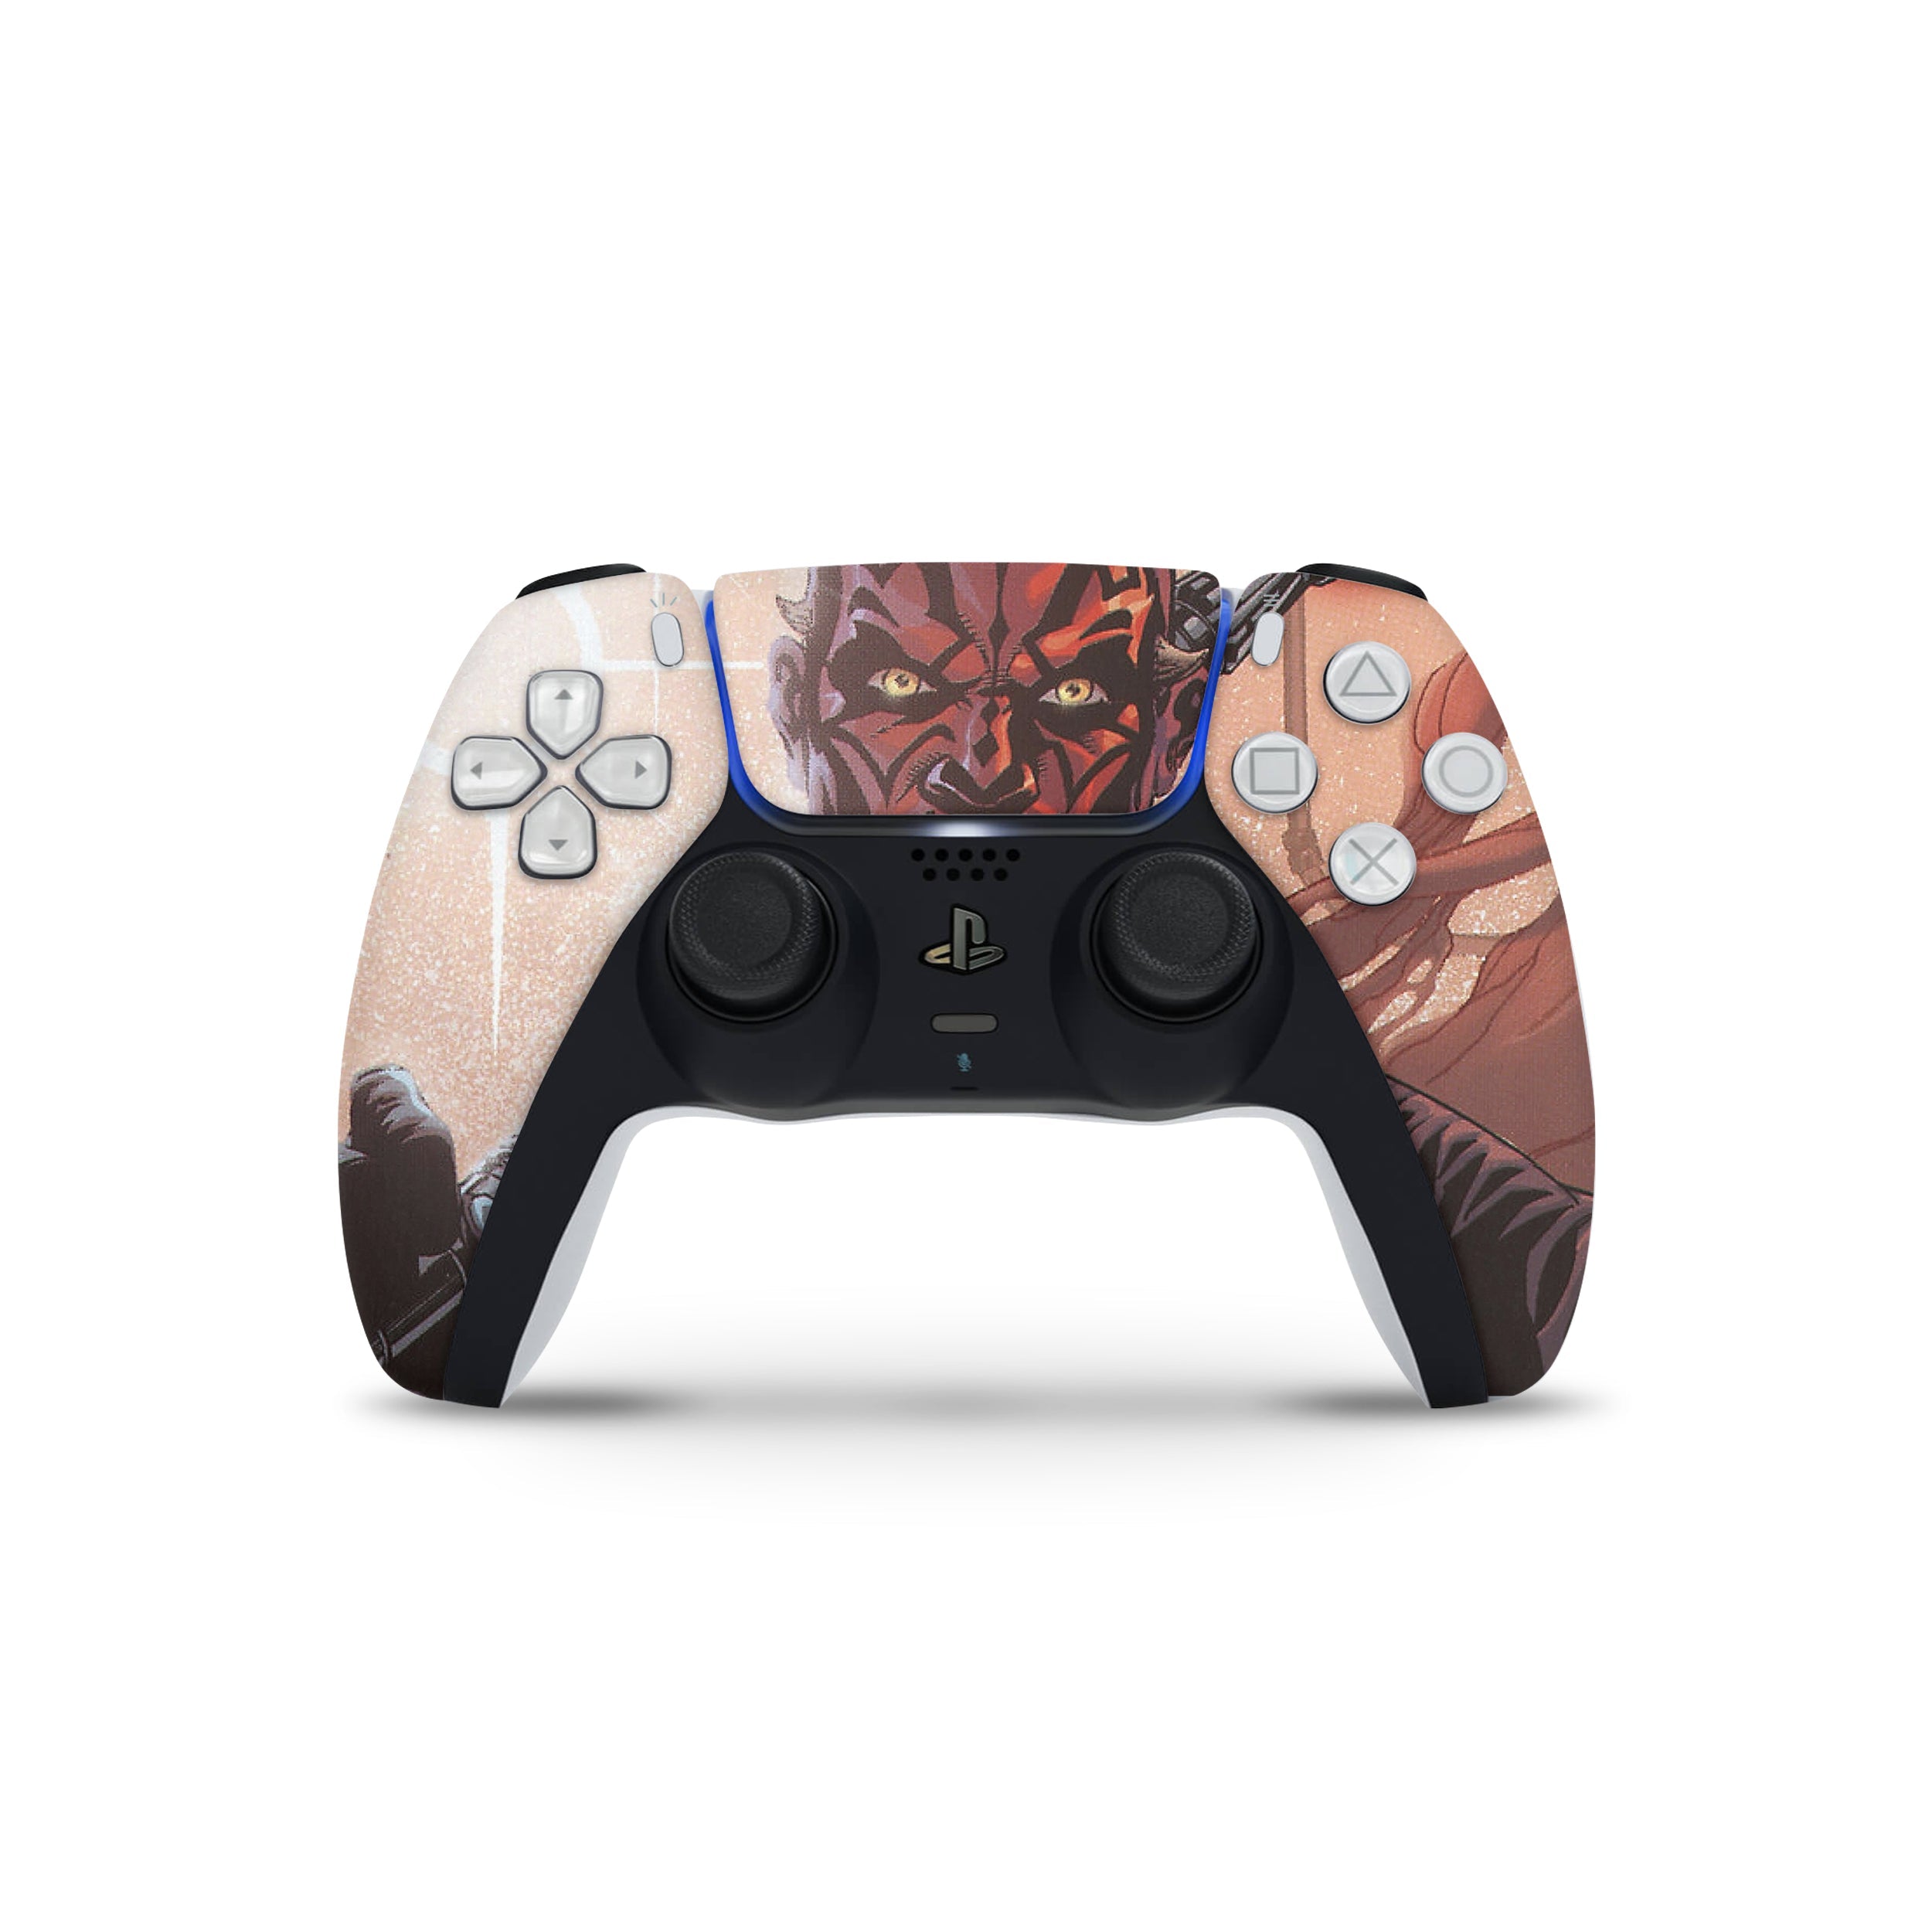 A video game skin featuring a Star Wars Darth Maul design for the PS5 DualSense Controller.